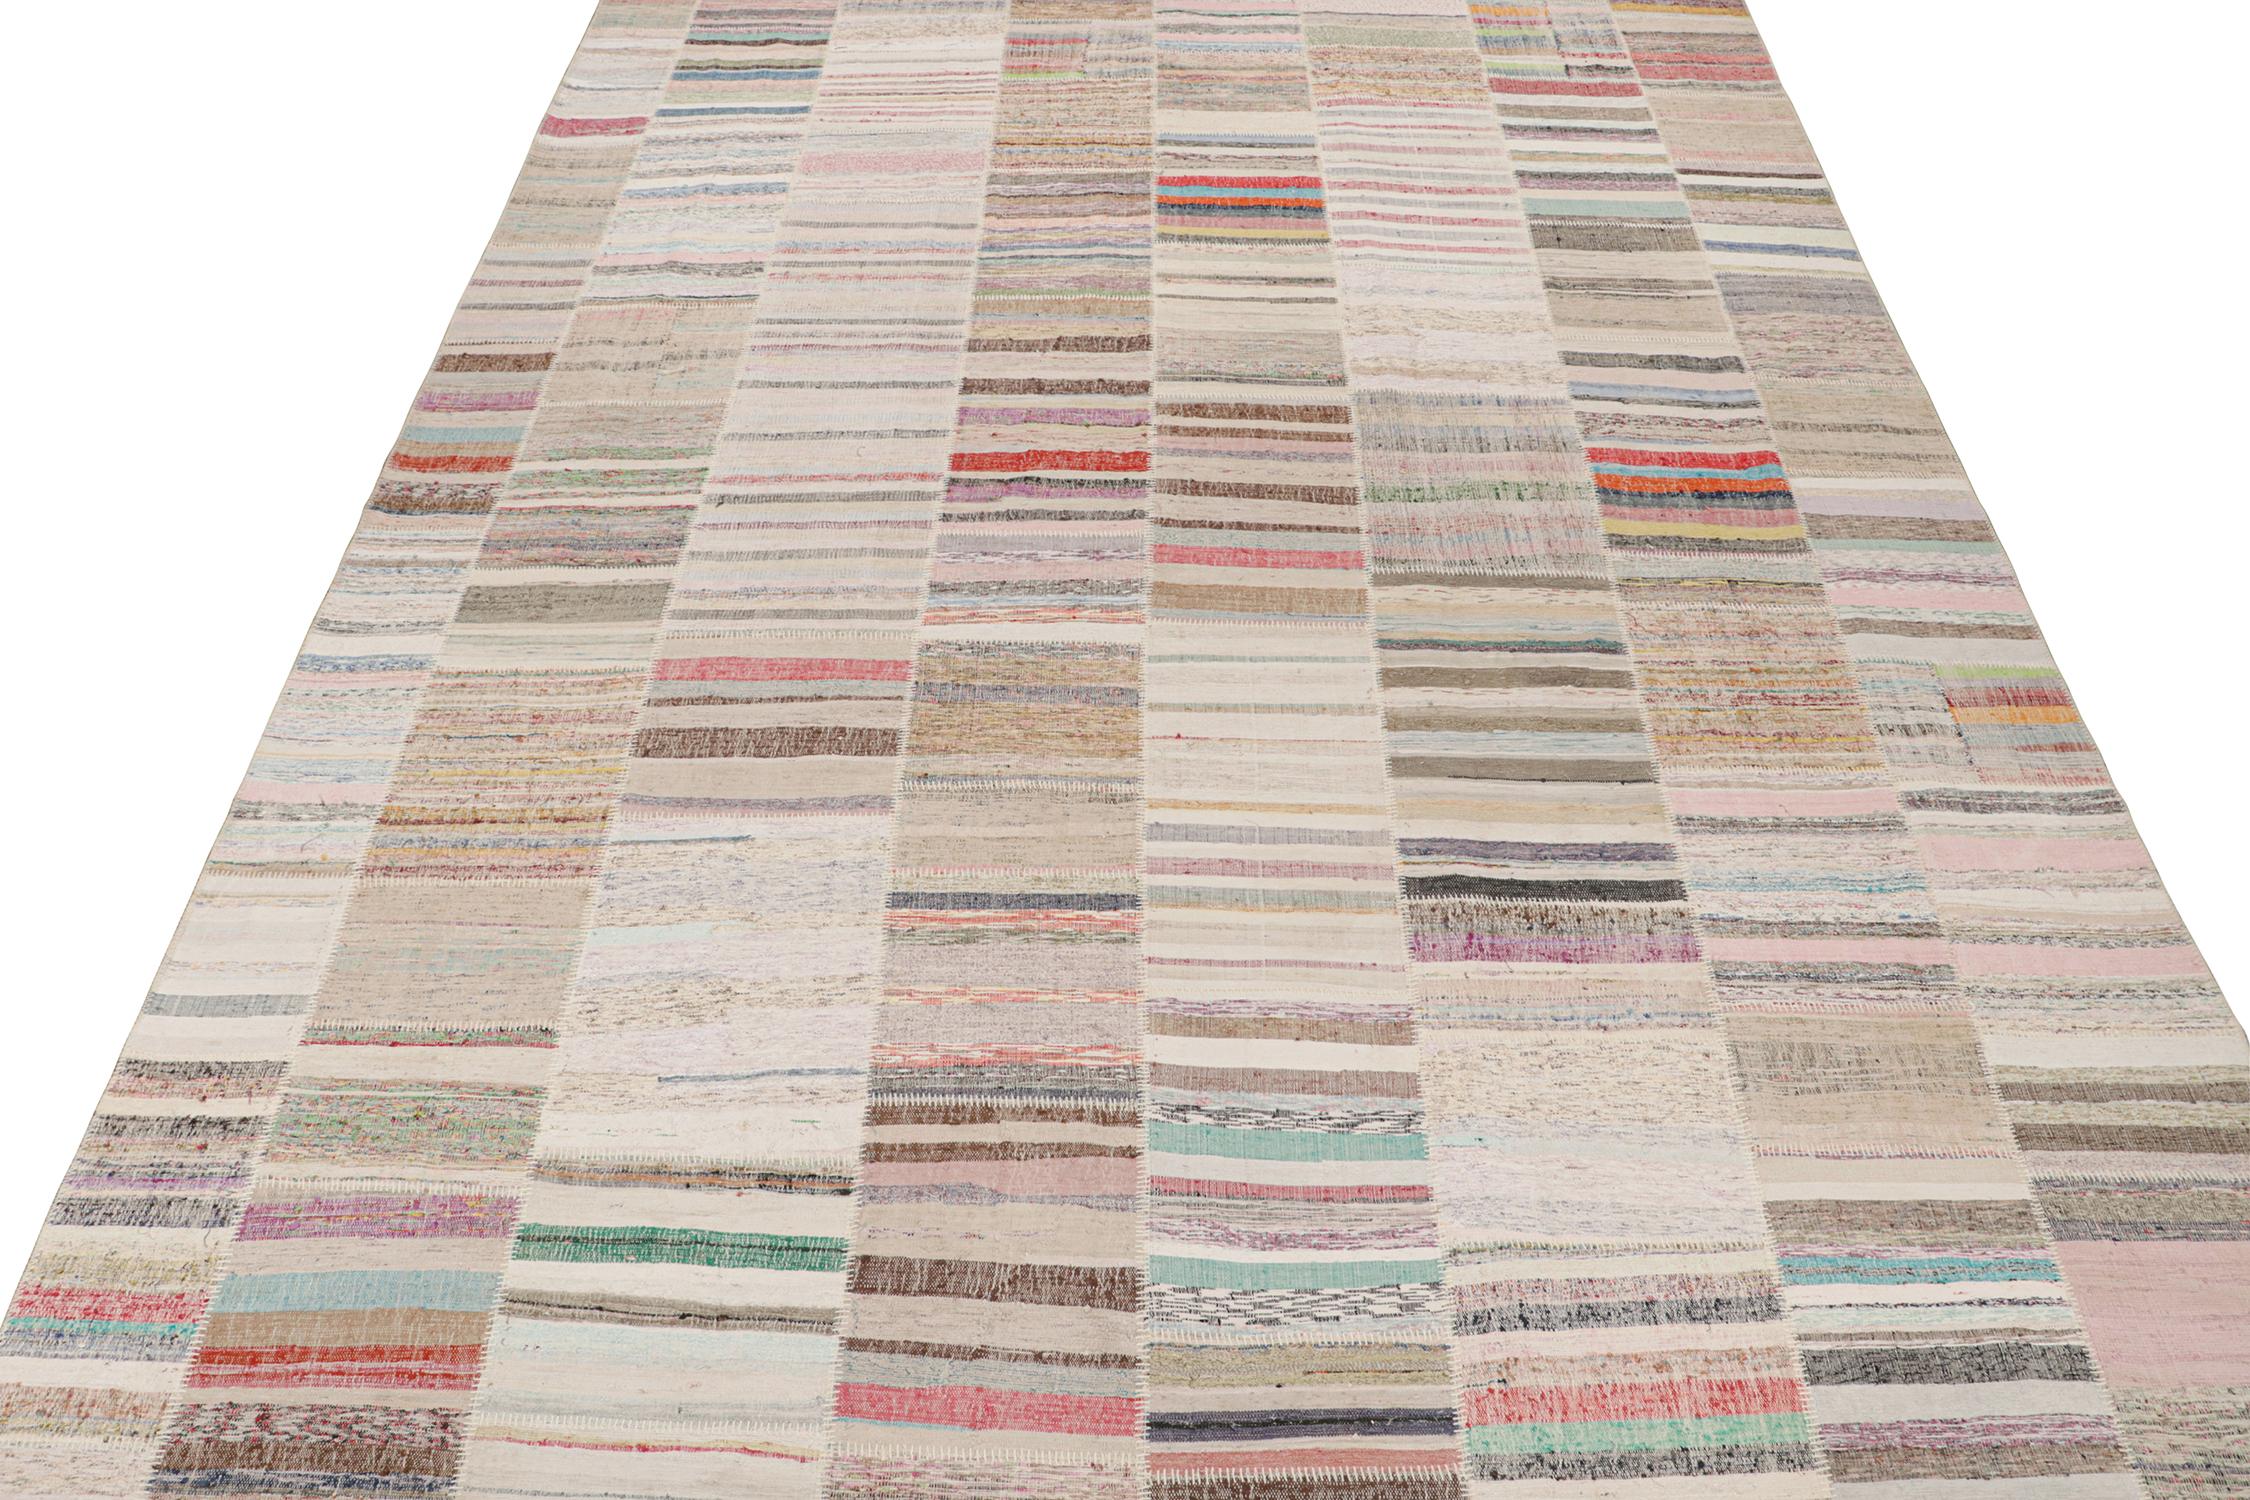 Rug & Kilim presents a contemporary 13x19 rug from their innovative new patchwork Kilim collection. 

Further On the Design:

This flat weave technique repurposes vintage yarns in polychromatic stripes and striae, achieving a playful look with